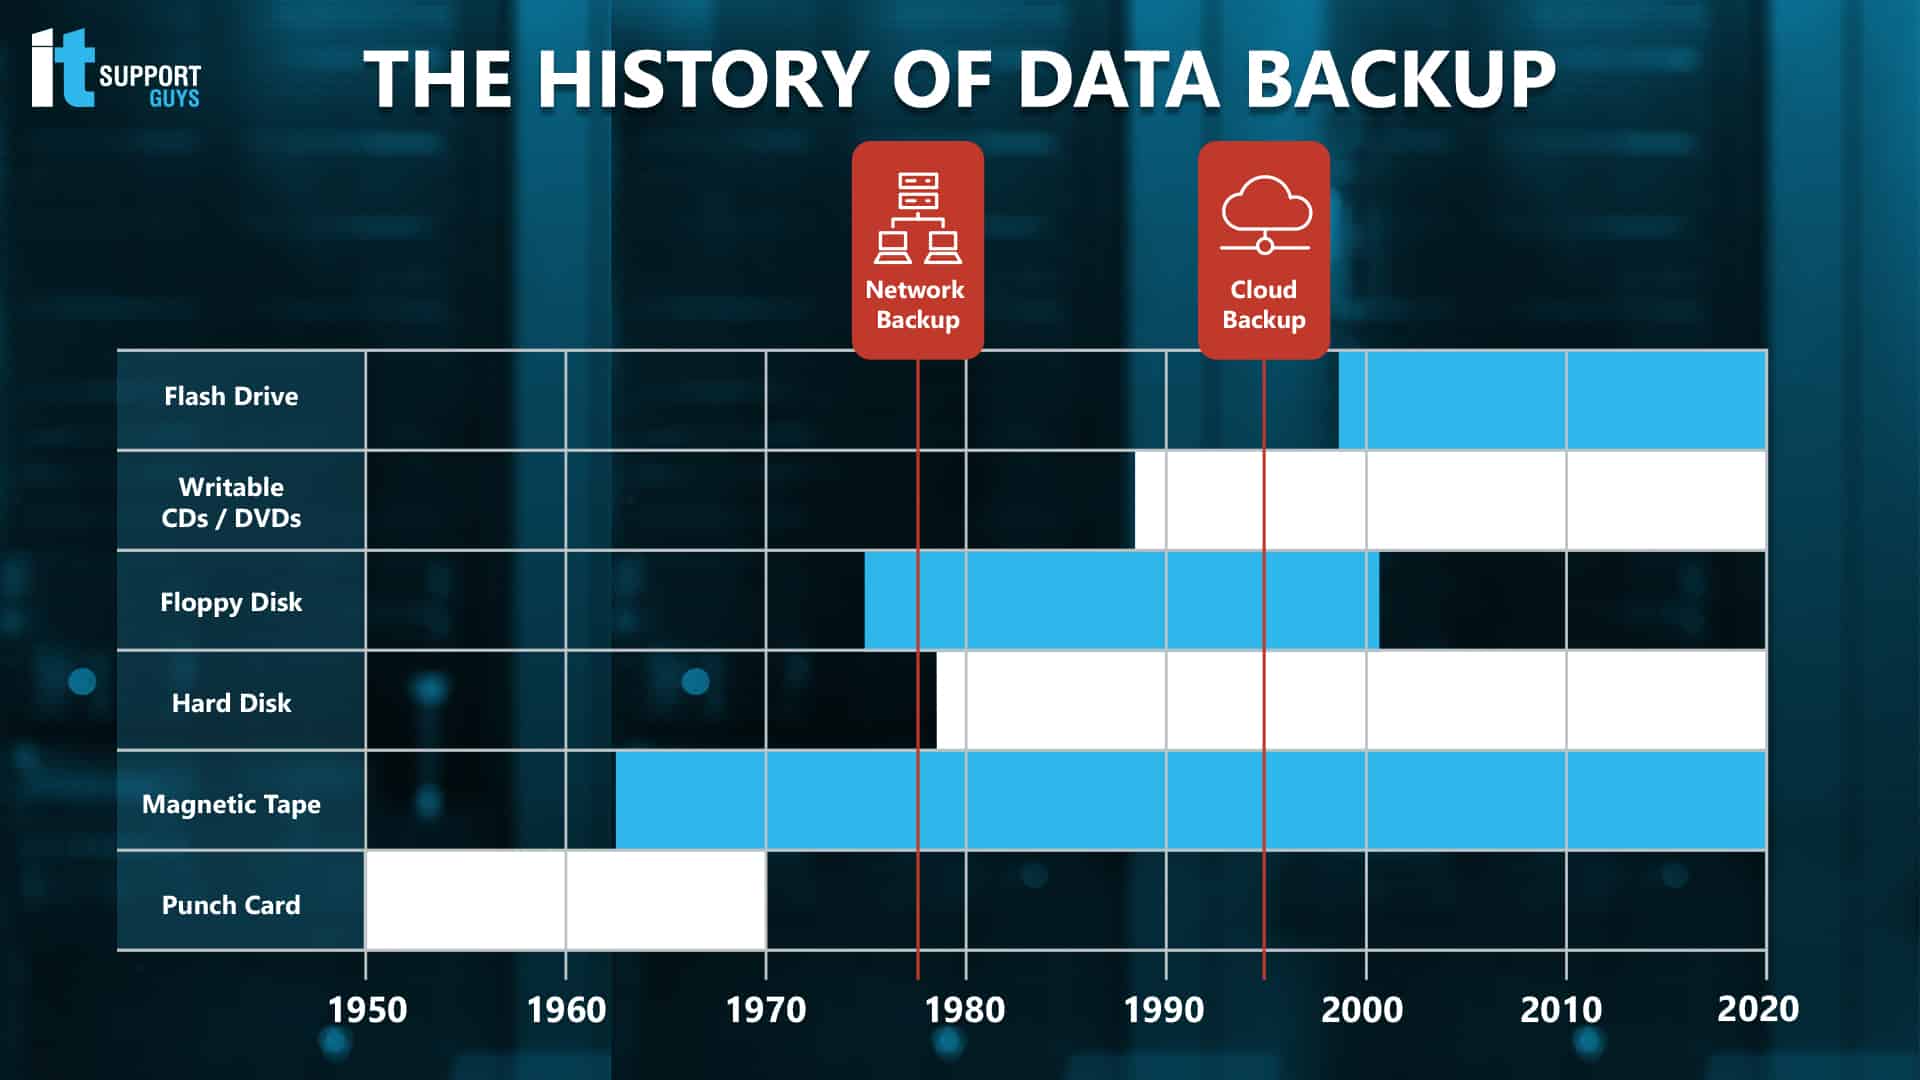 A timeline of different media used for/history of data backup since 1950